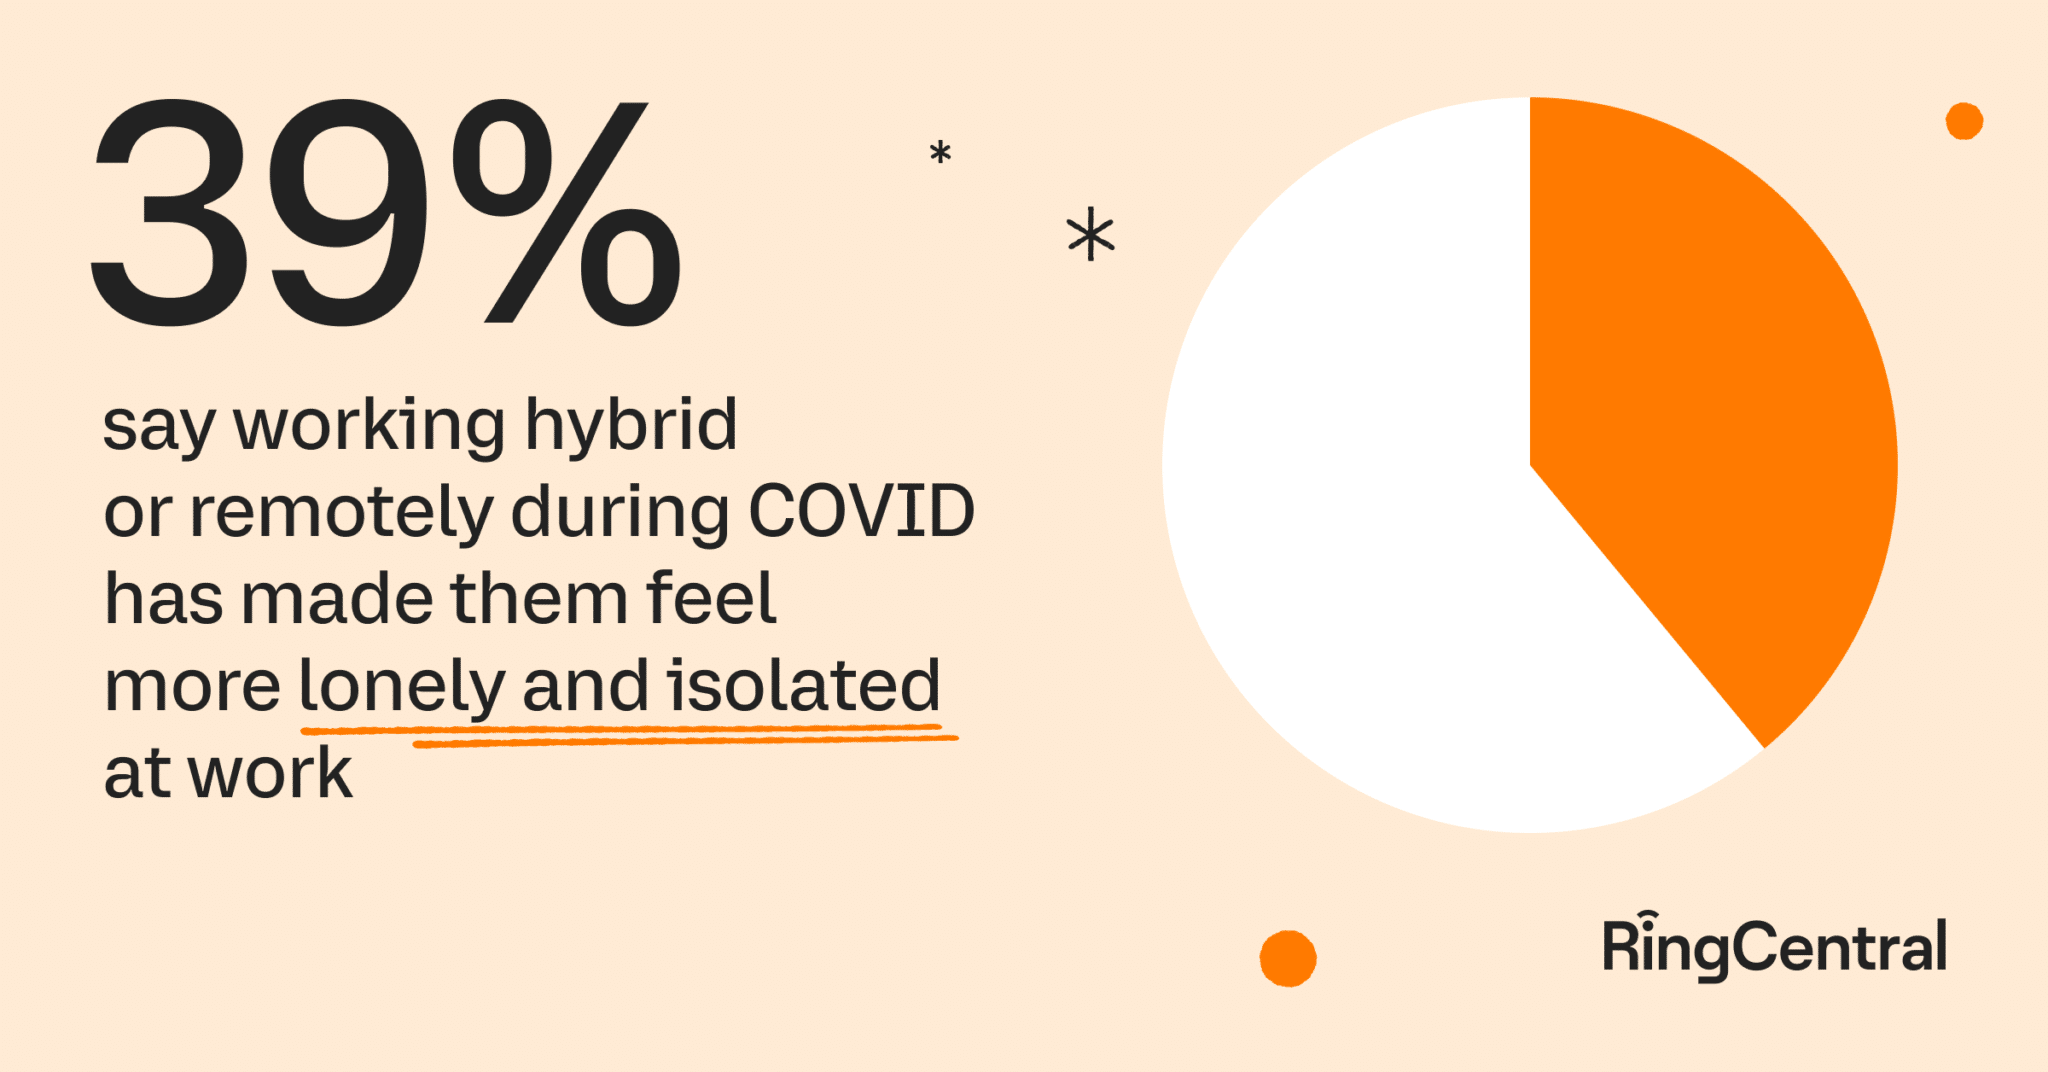 state of human connections report 39% say working hybrid or remotely during COVID has made them feel more lonely and isolated at work